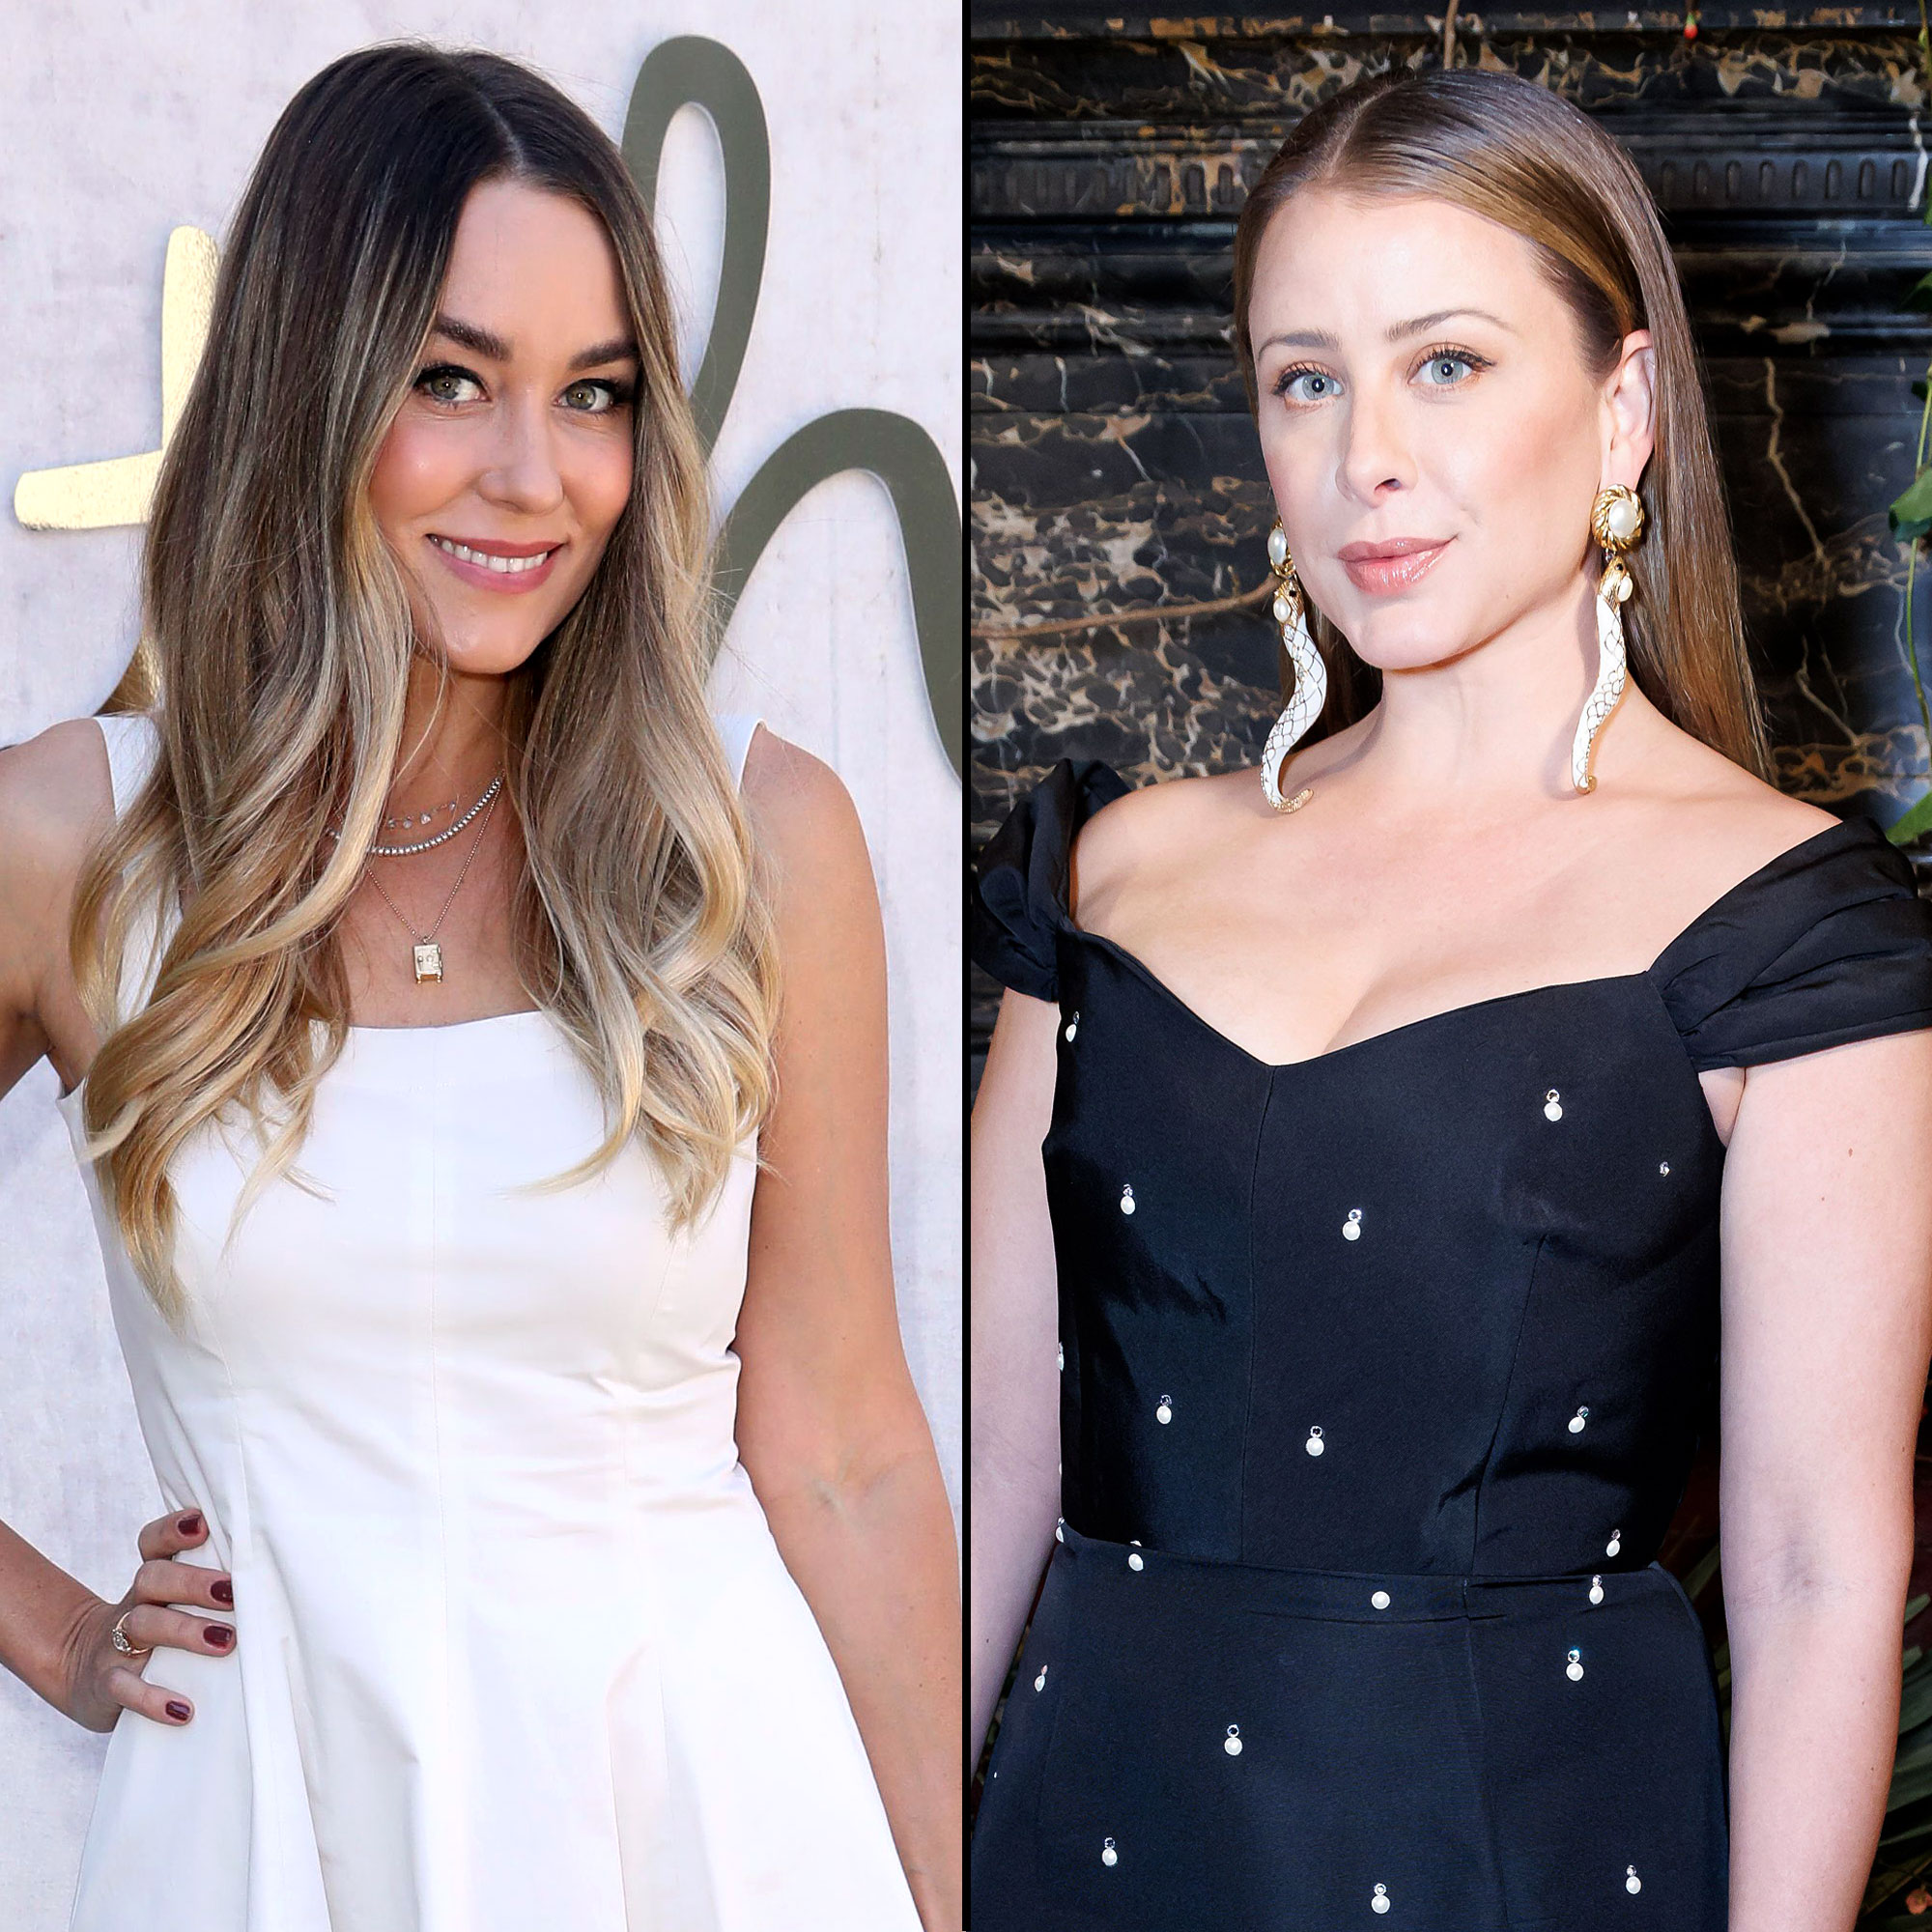 5 Style Rules We Learned From Lauren Conrad and Co. on The Hills